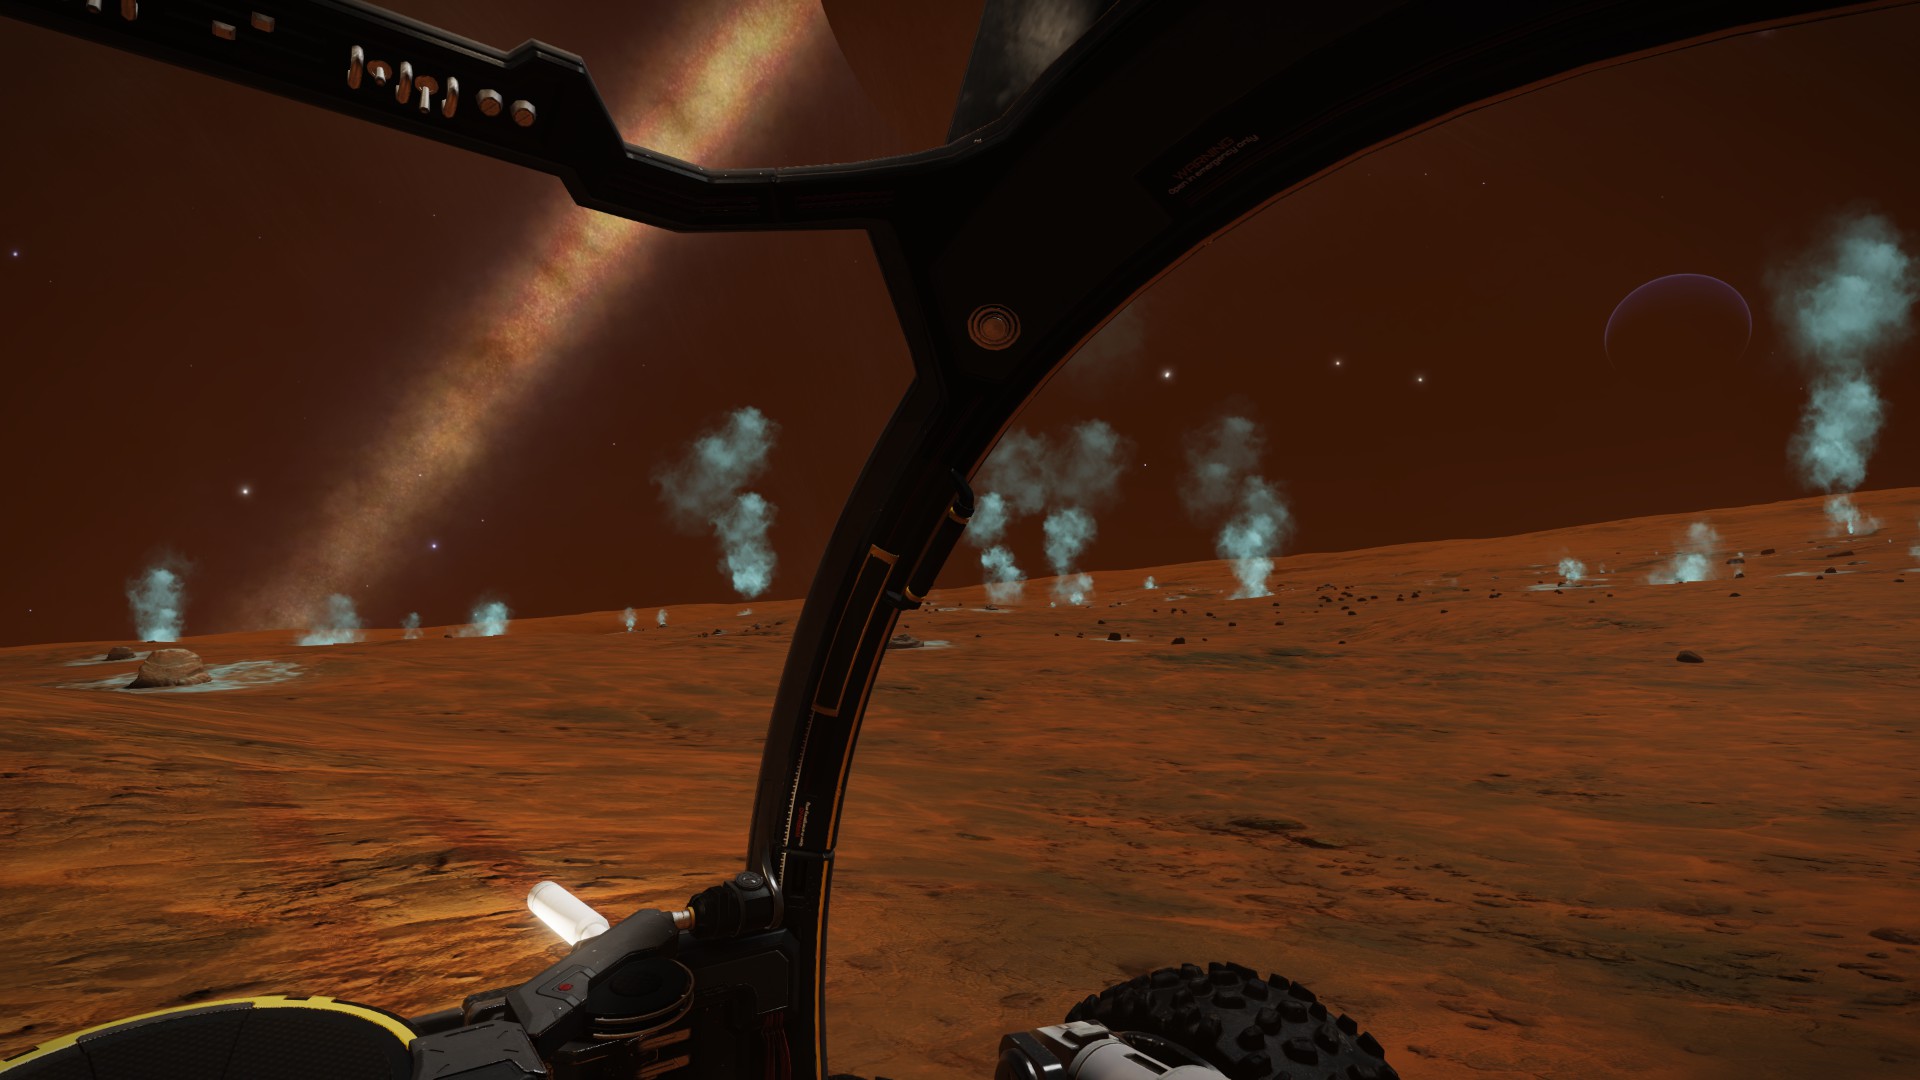 Geysers and the Gas giant in the background